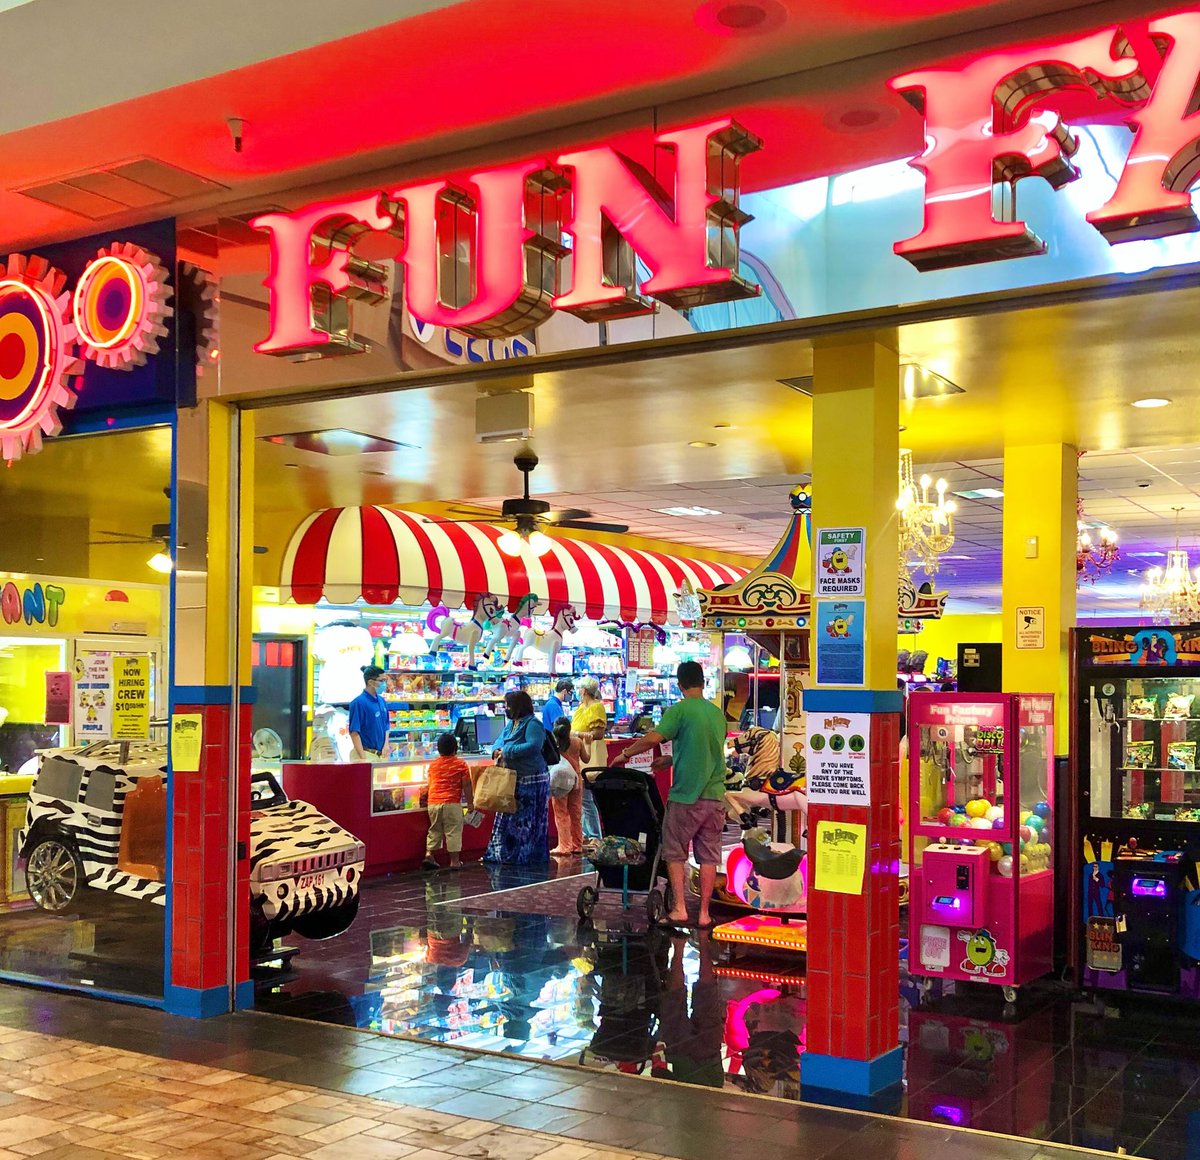 ⭐️It’s Golden Days Tuesday meaning registered Gold Members get 50% off games at Fun Factory! Bring your keiki for some fun entertainment! ⭐️